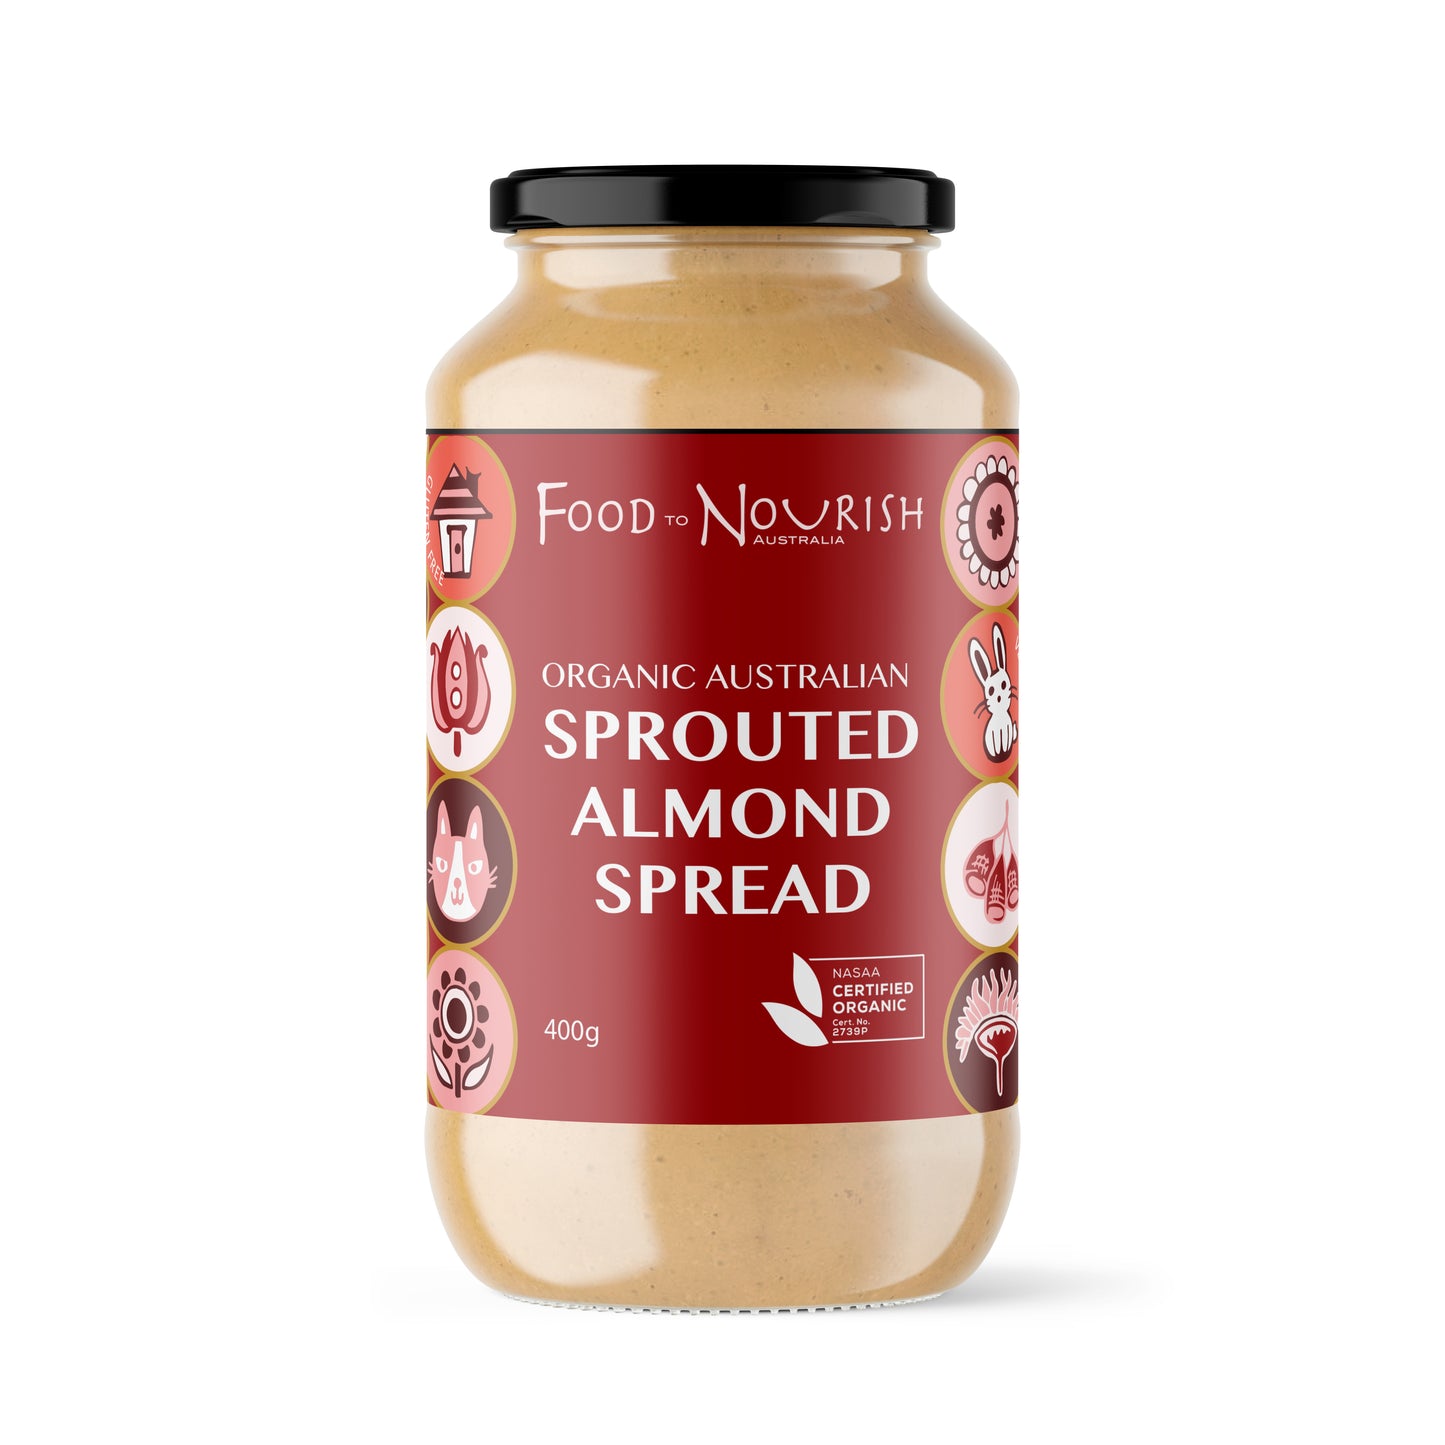 Food To Nourish Sprouted Nut Butter 200g Or 400g, Almond Spread